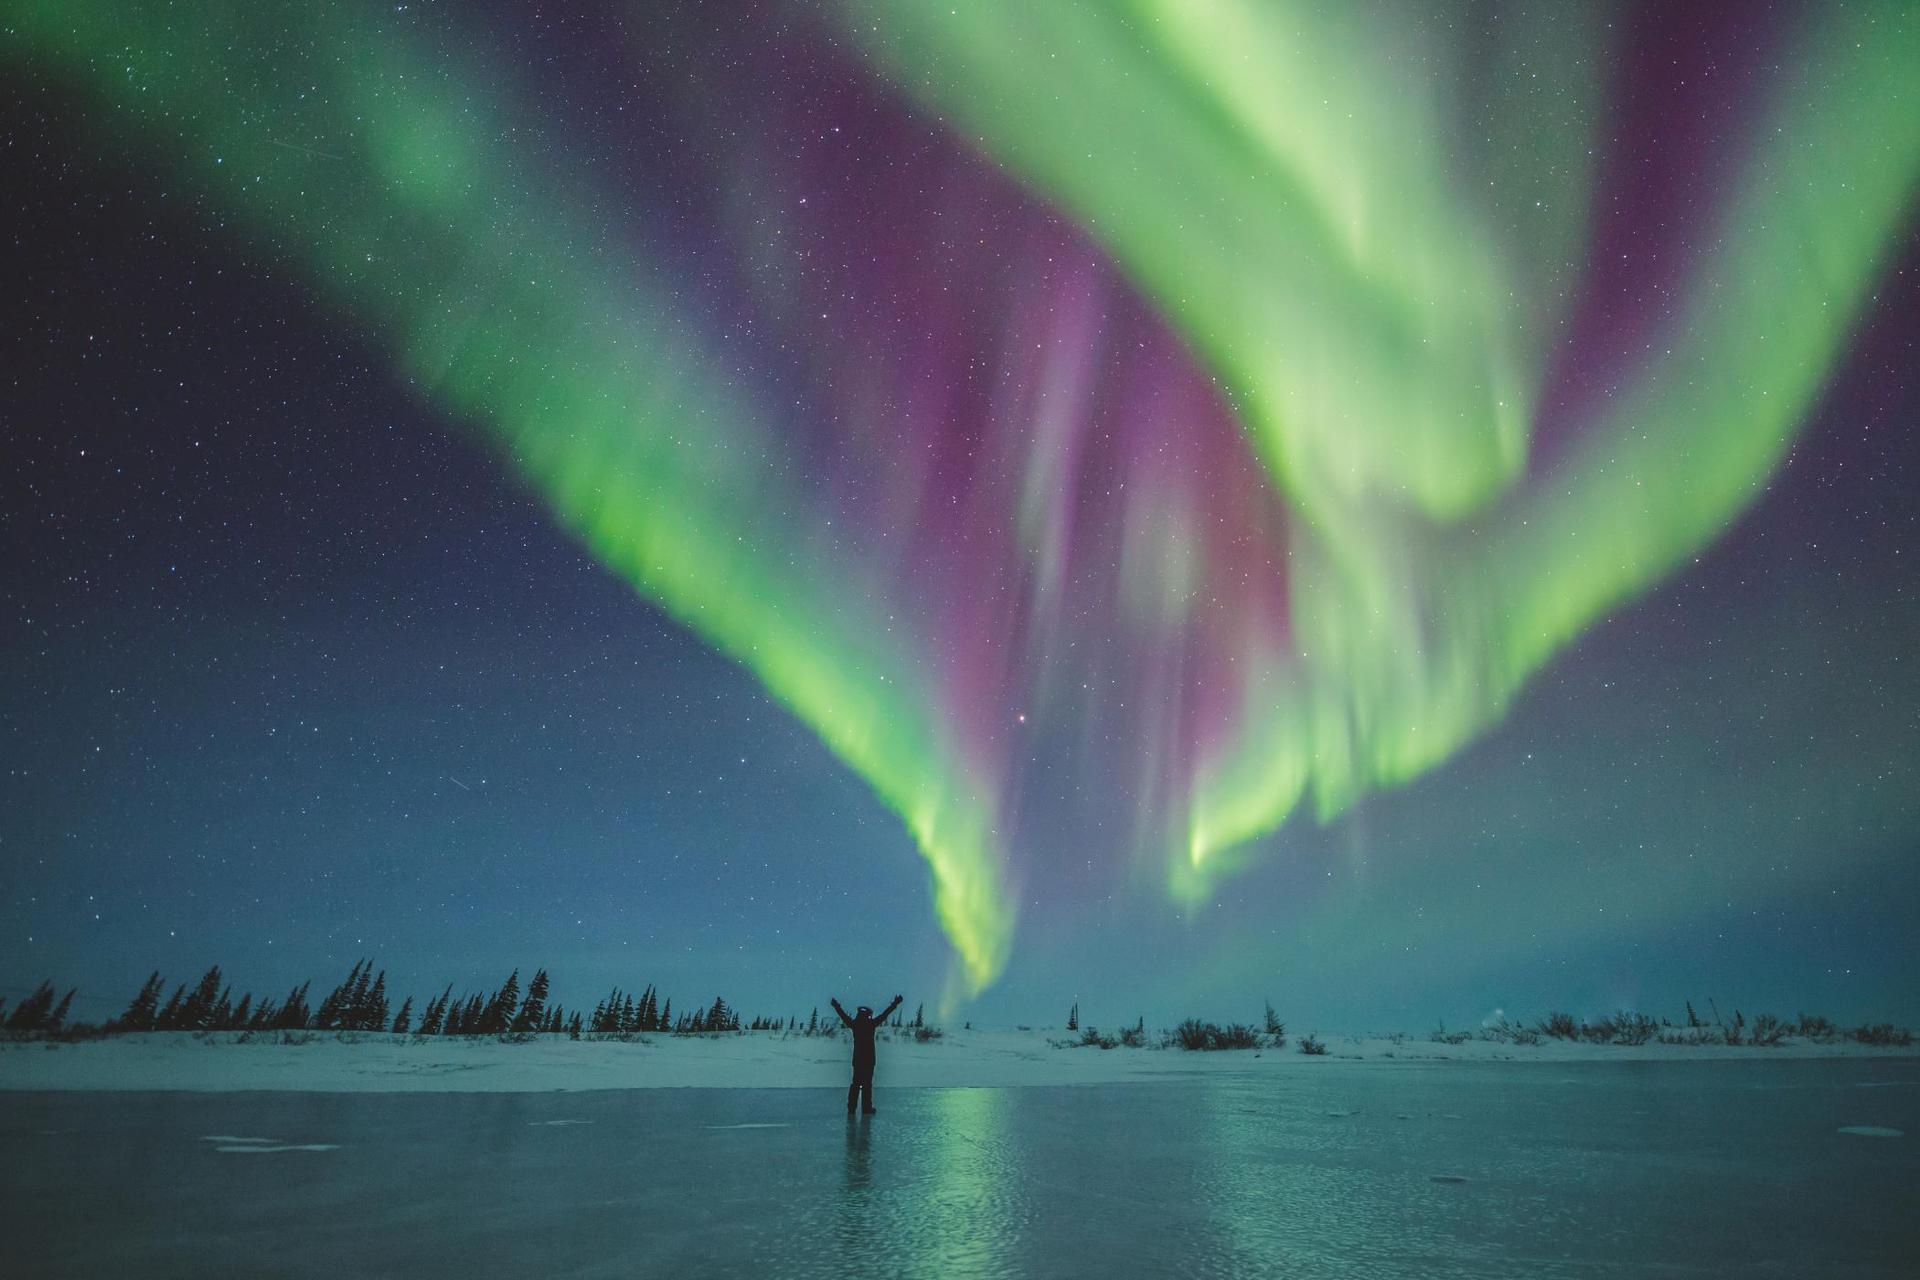 A person stands on a frozen lake, under the northern lights